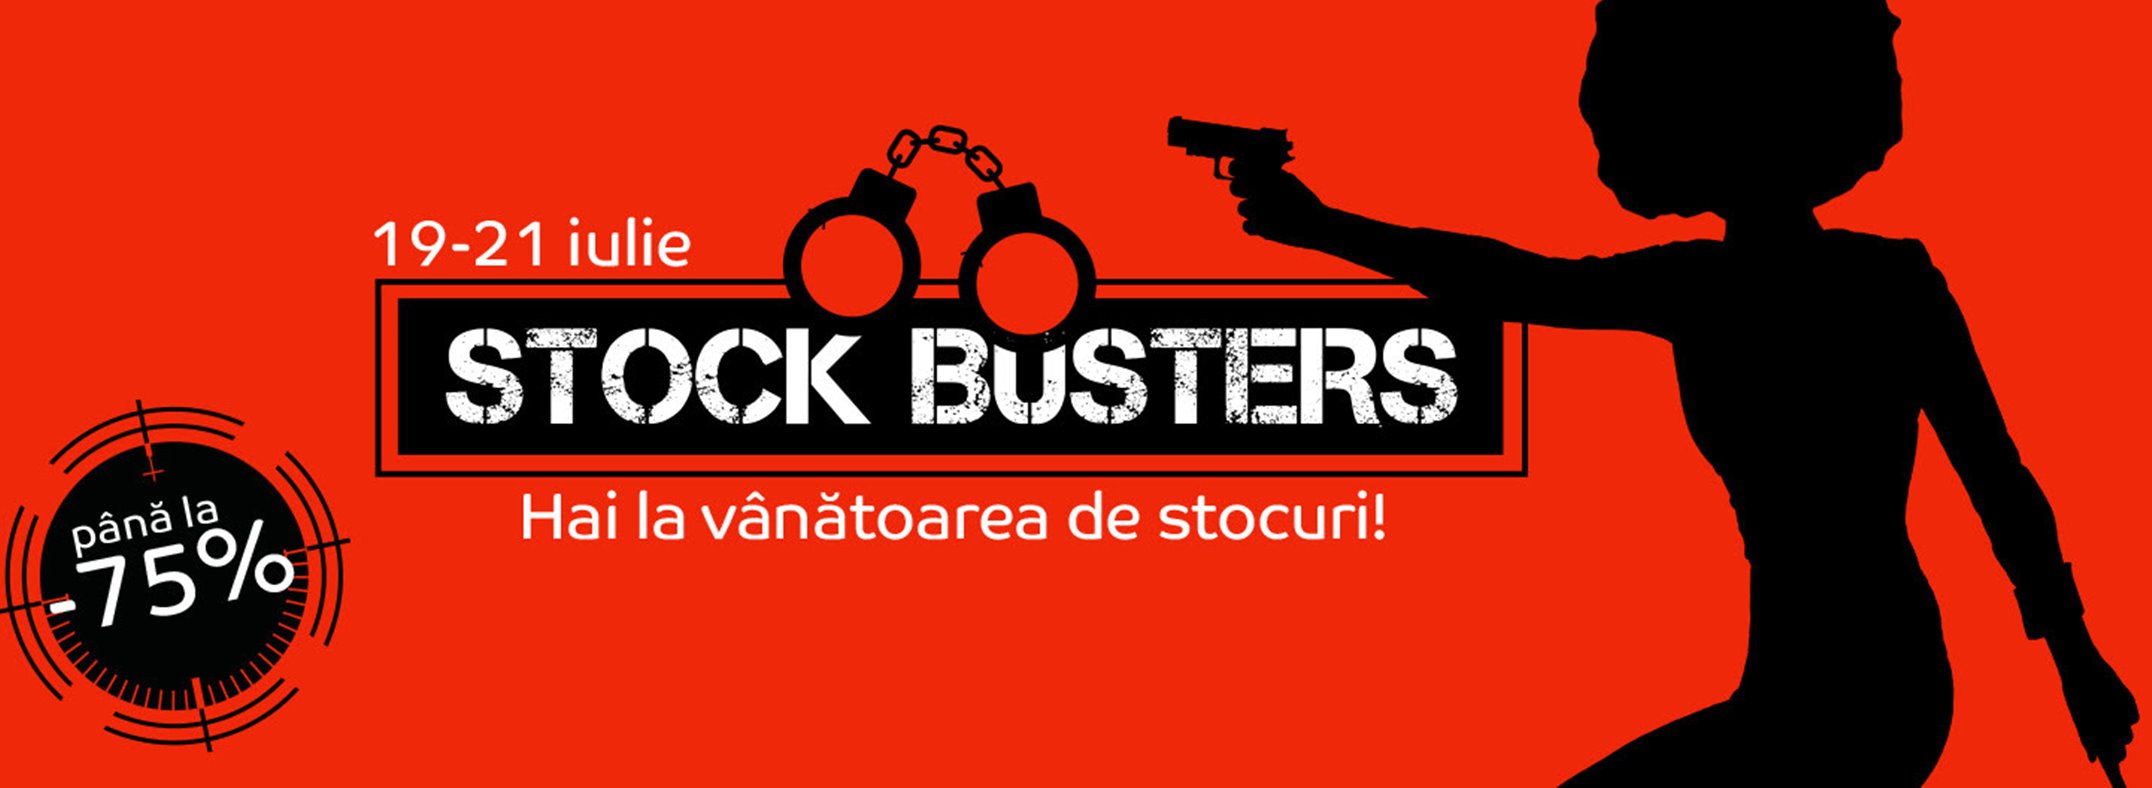 stocks busters